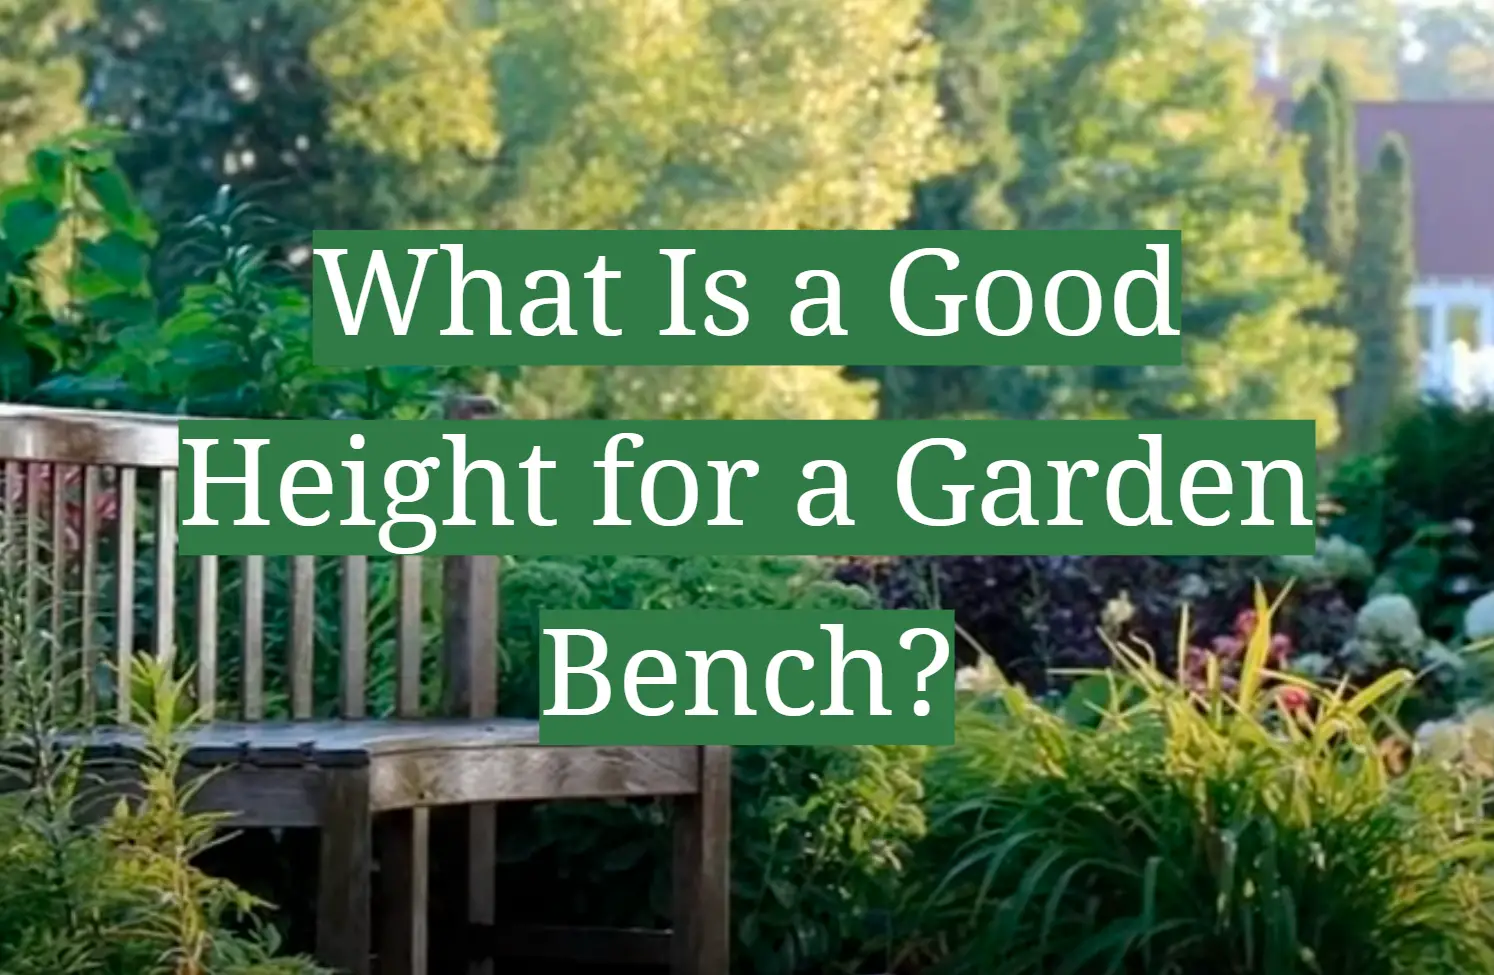 What Is a Good Height for a Garden Bench?